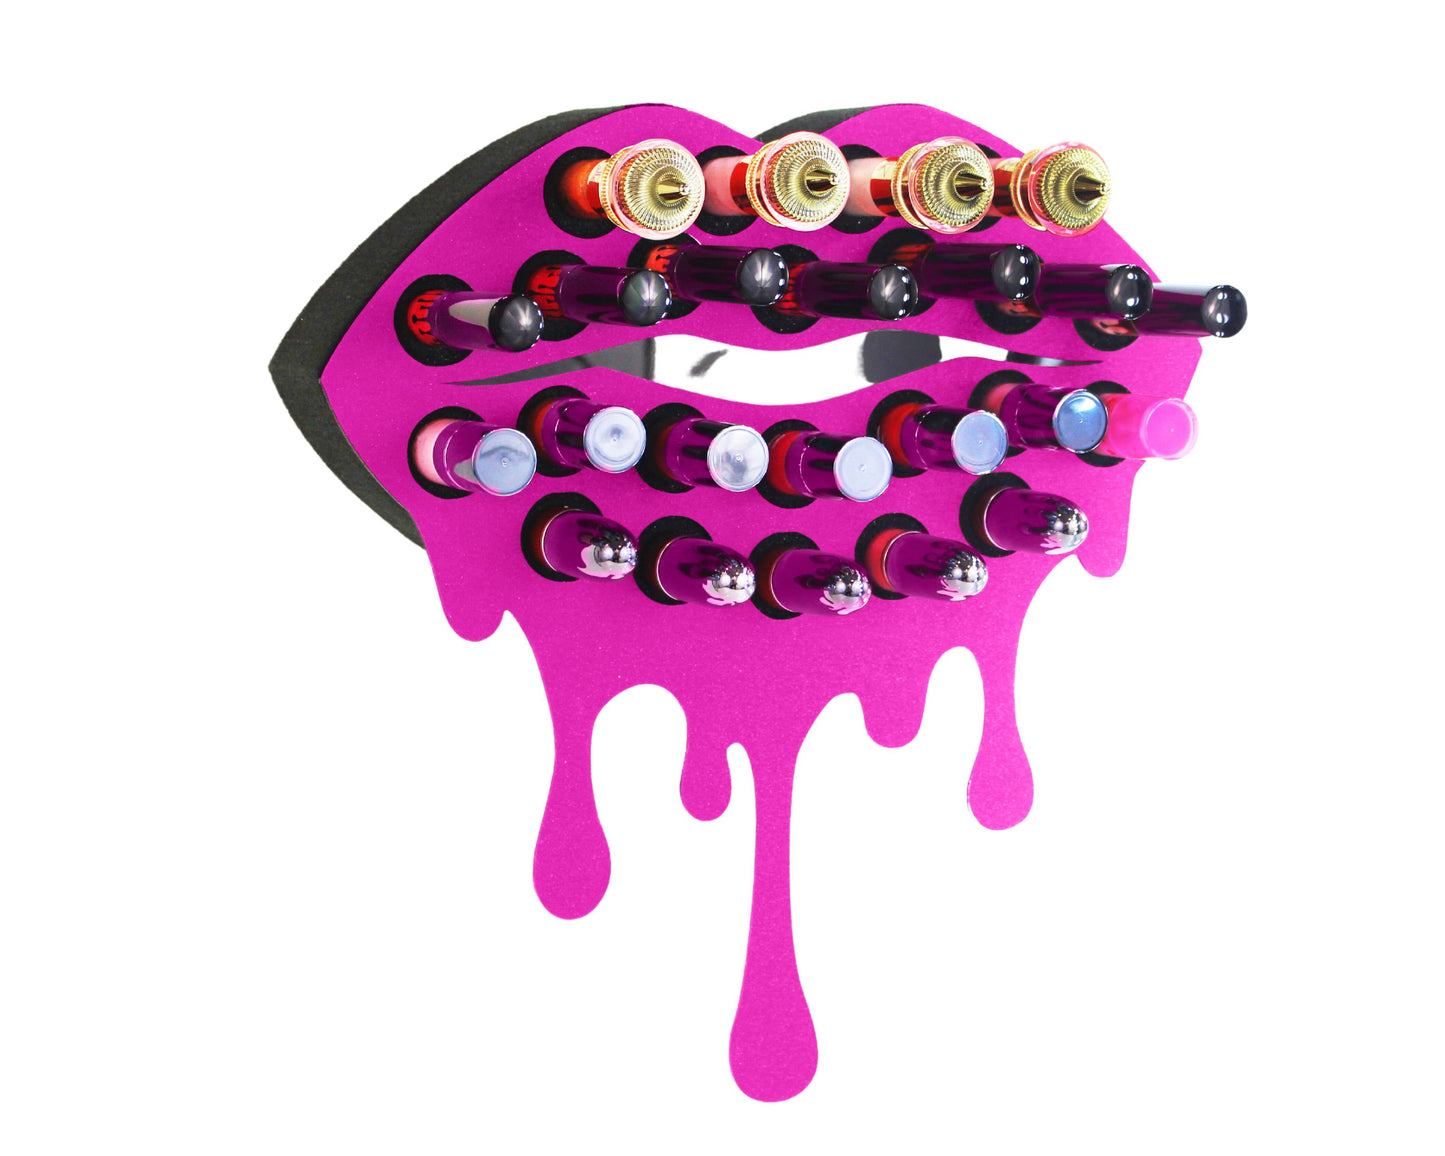 Dark Pink Medium Lip Design Lipstick Organizer holding 23 lipsticks mounted on the wall with lipstick easily accessible and organized. Wall Mount Lipstick Holder that looks like wall art. The background is white.